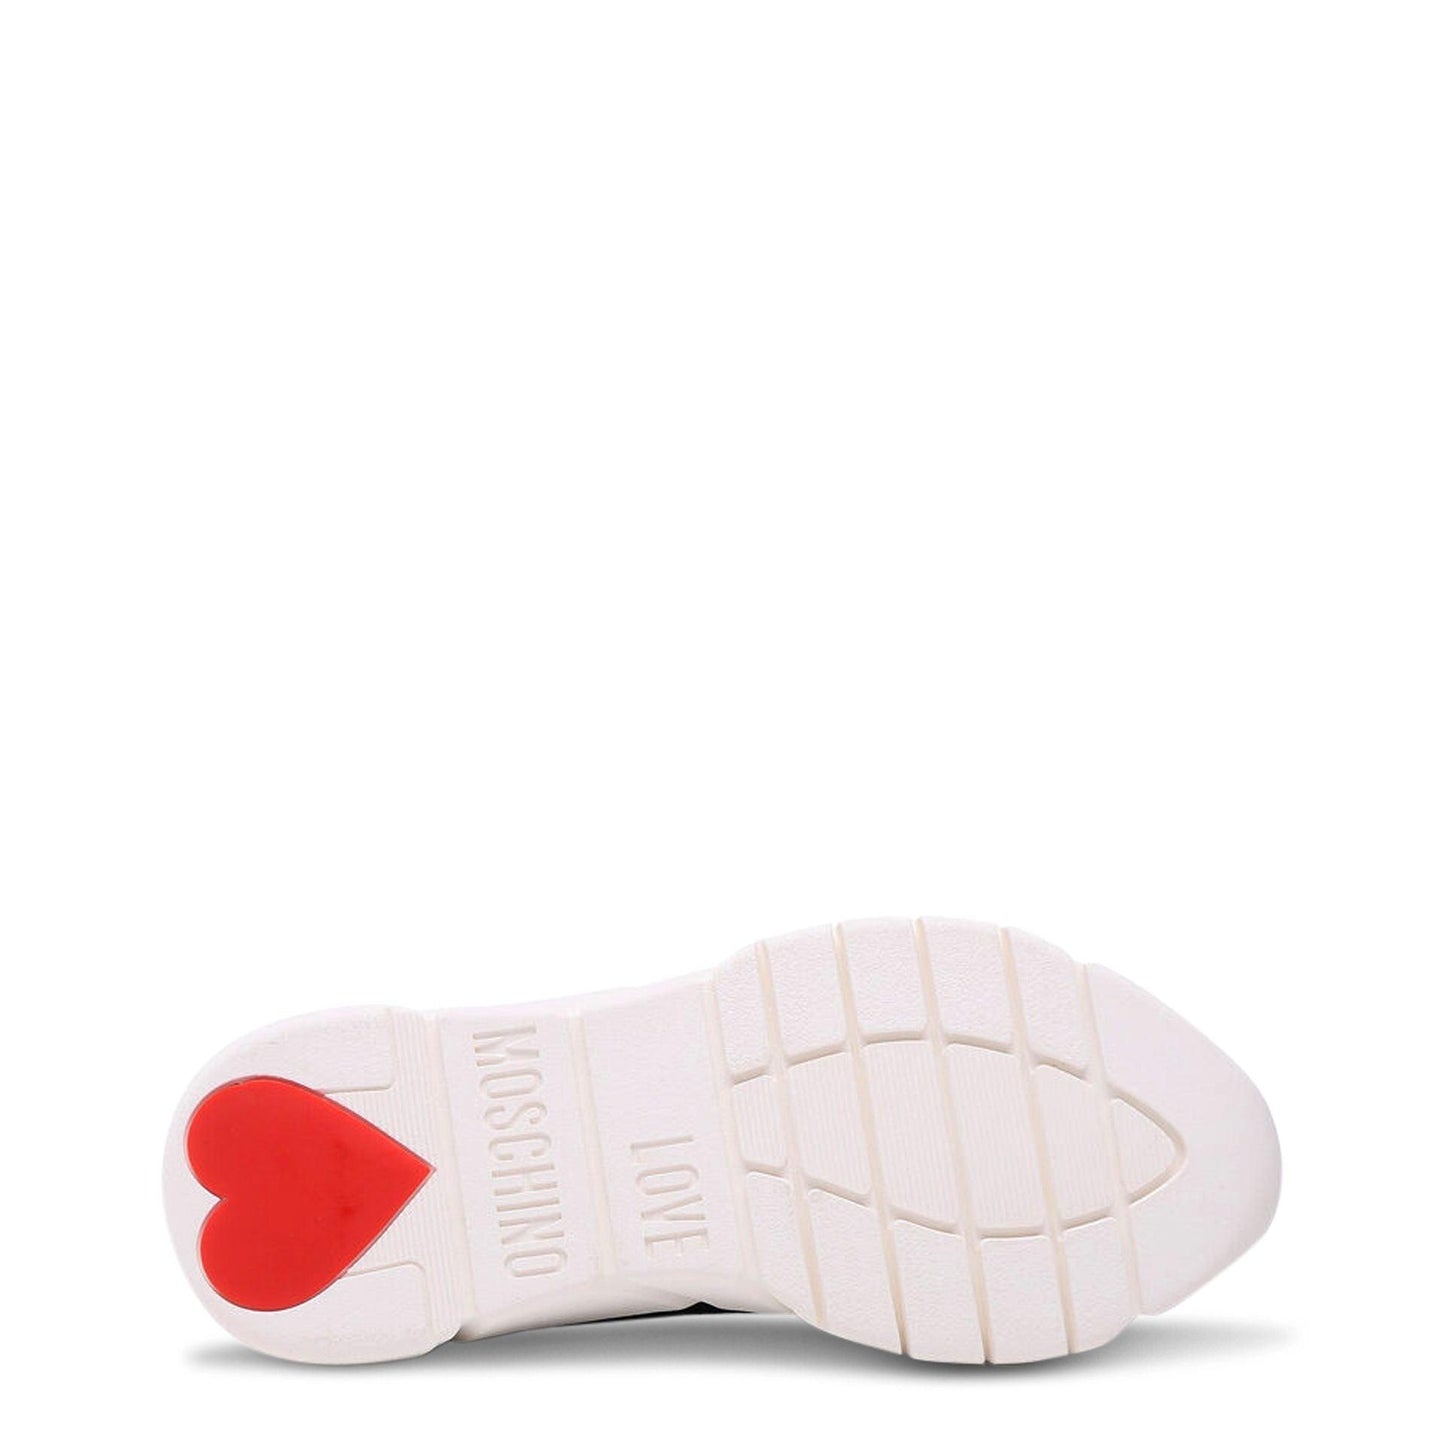 Women Sneakers - Love Moschino Sneakers Shoes - Trainers - Sneakers - Guocali